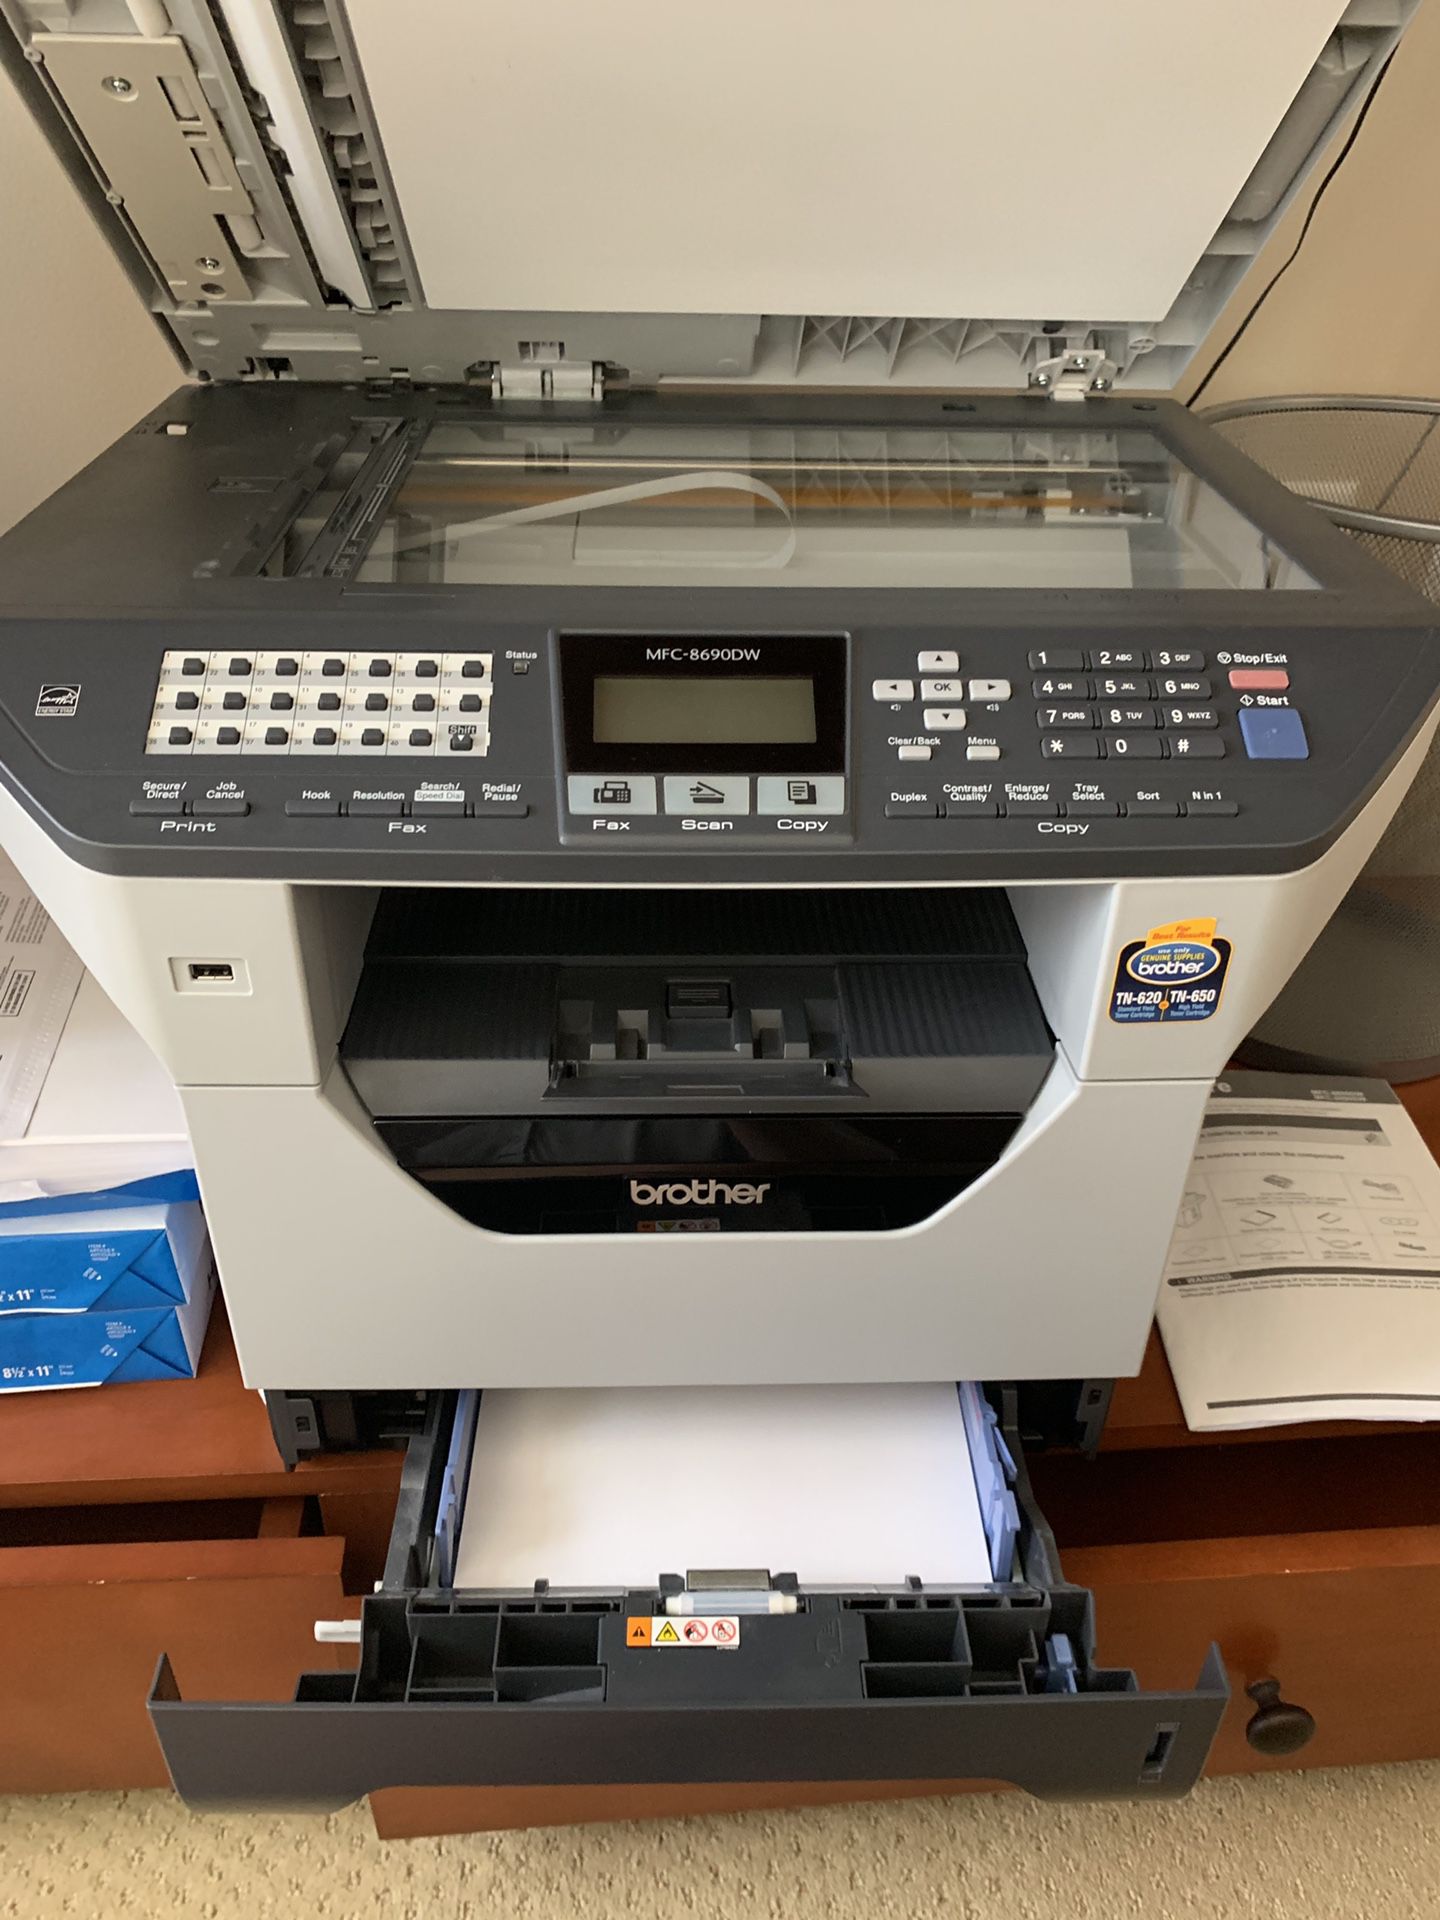 Brother MFC-8690DW Printer With Extra Ink Cartridge